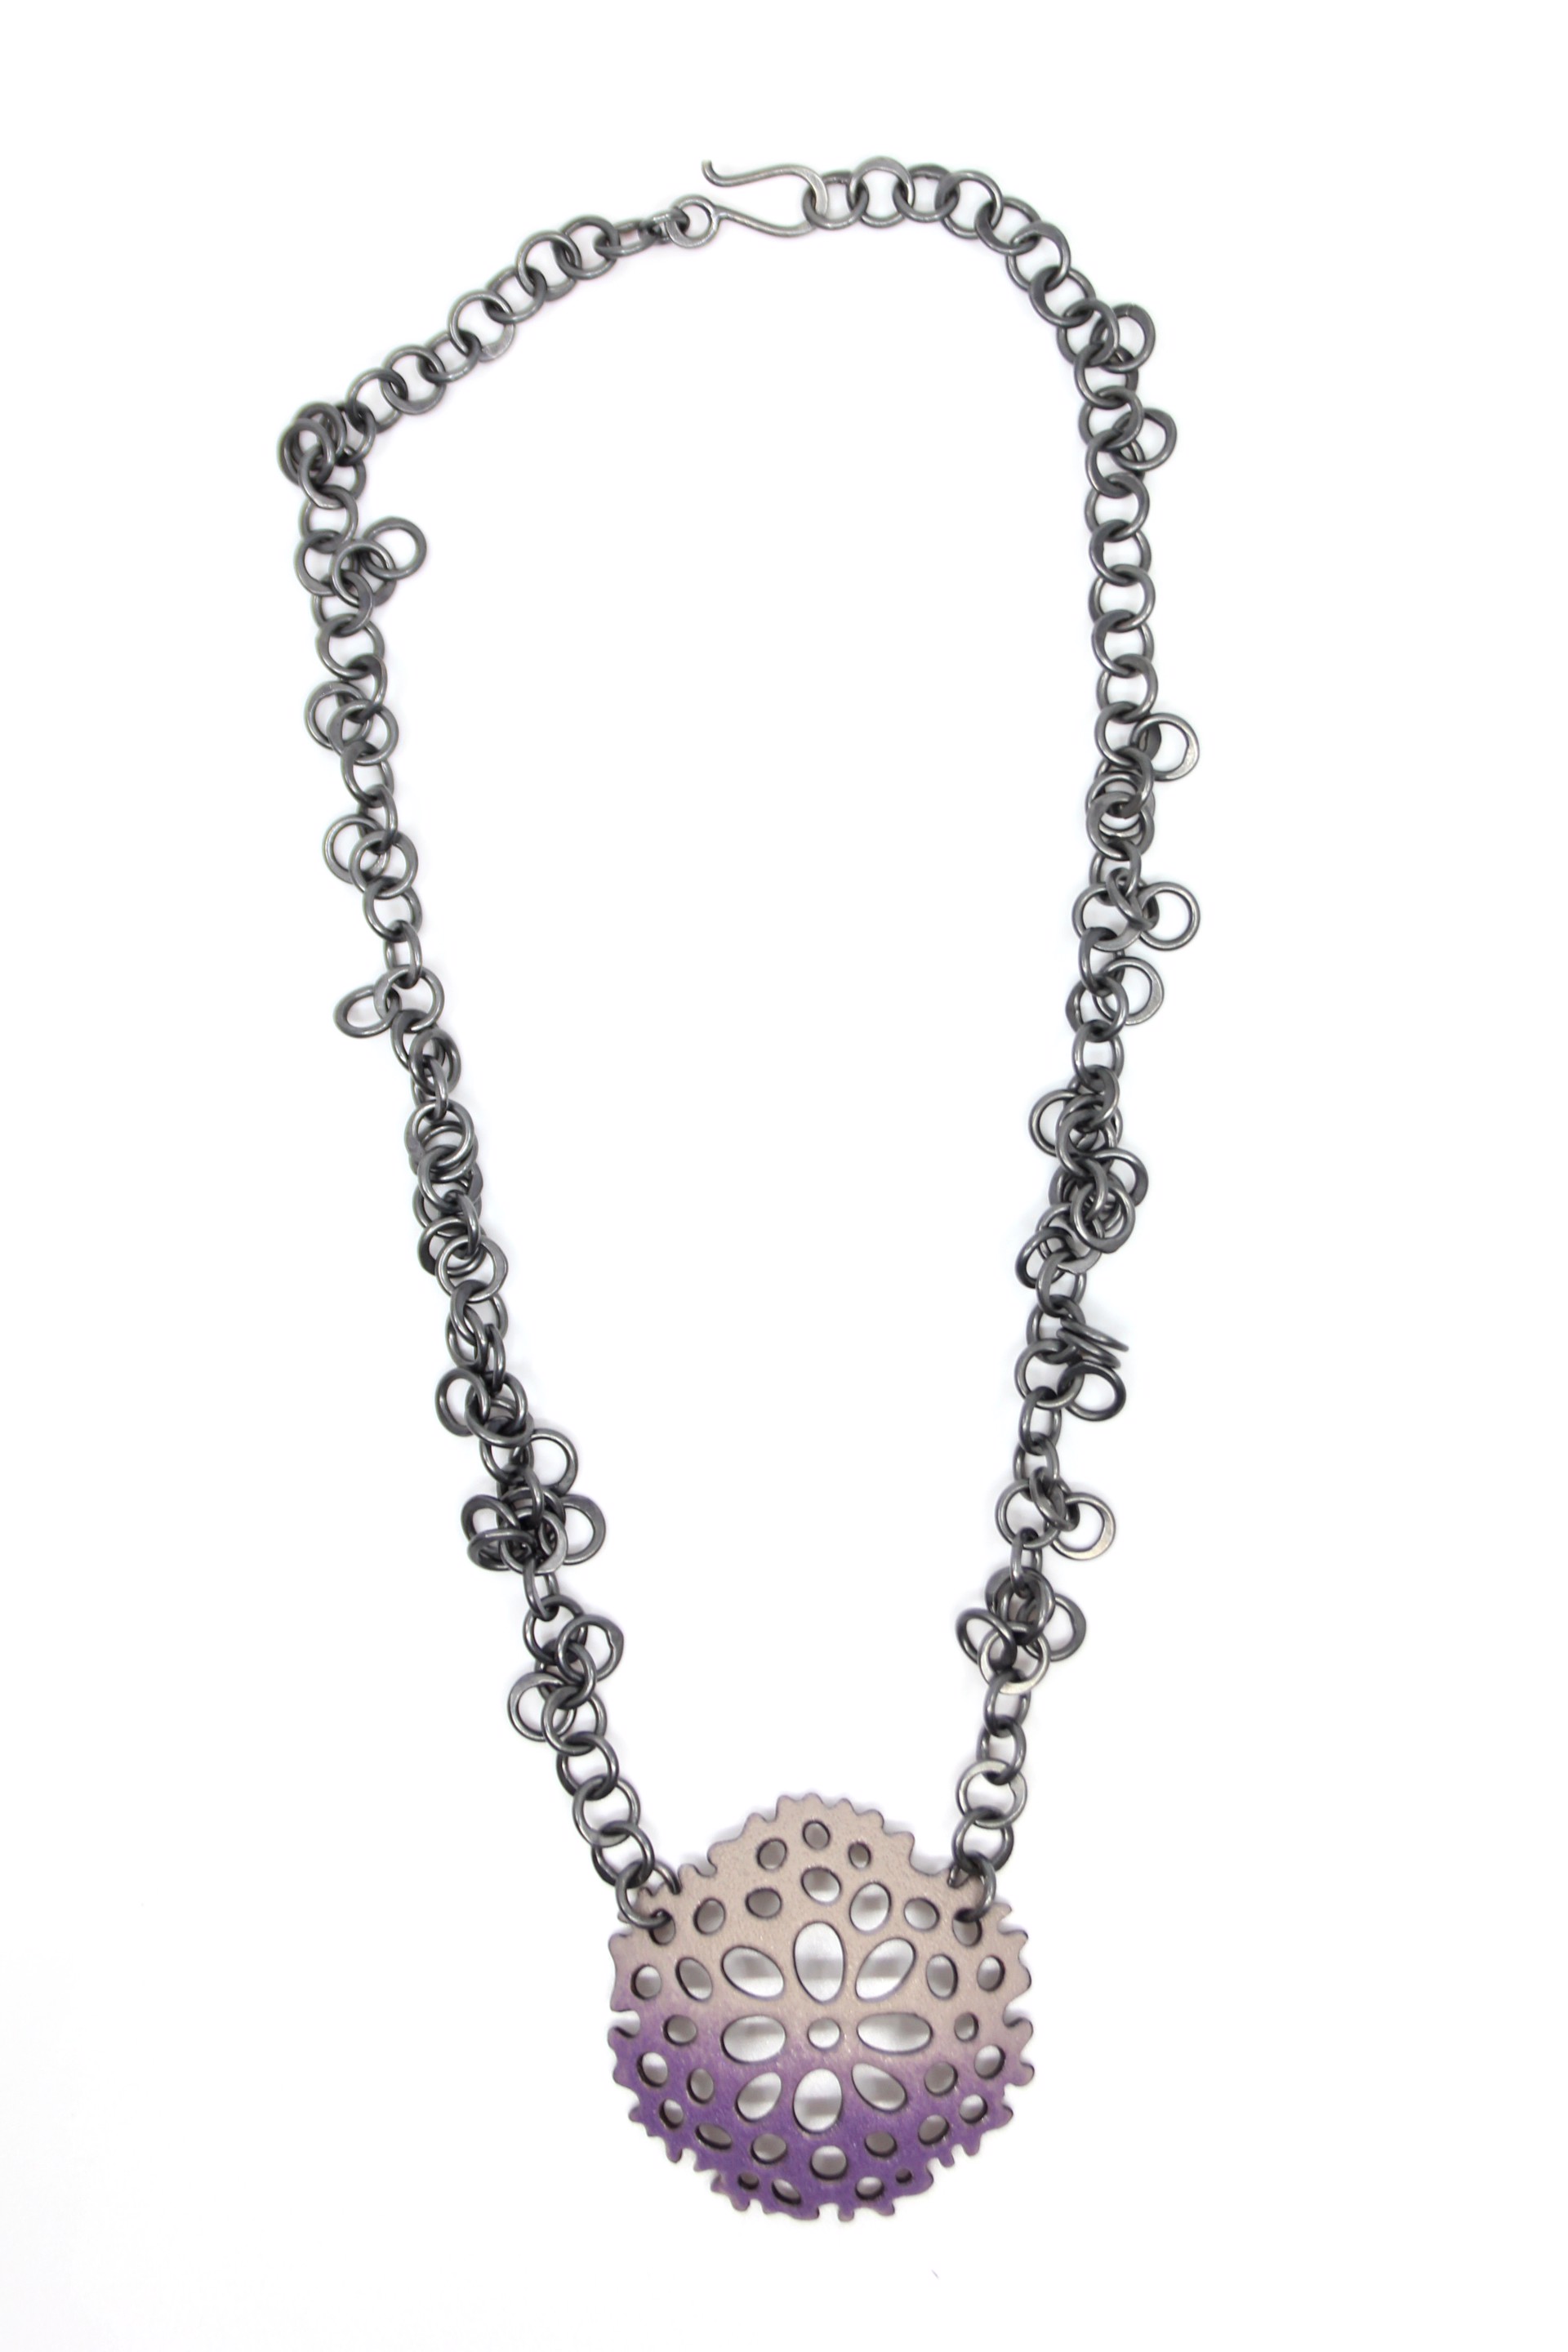 Cell Necklace on Cluster Chain by Joanna Nealey